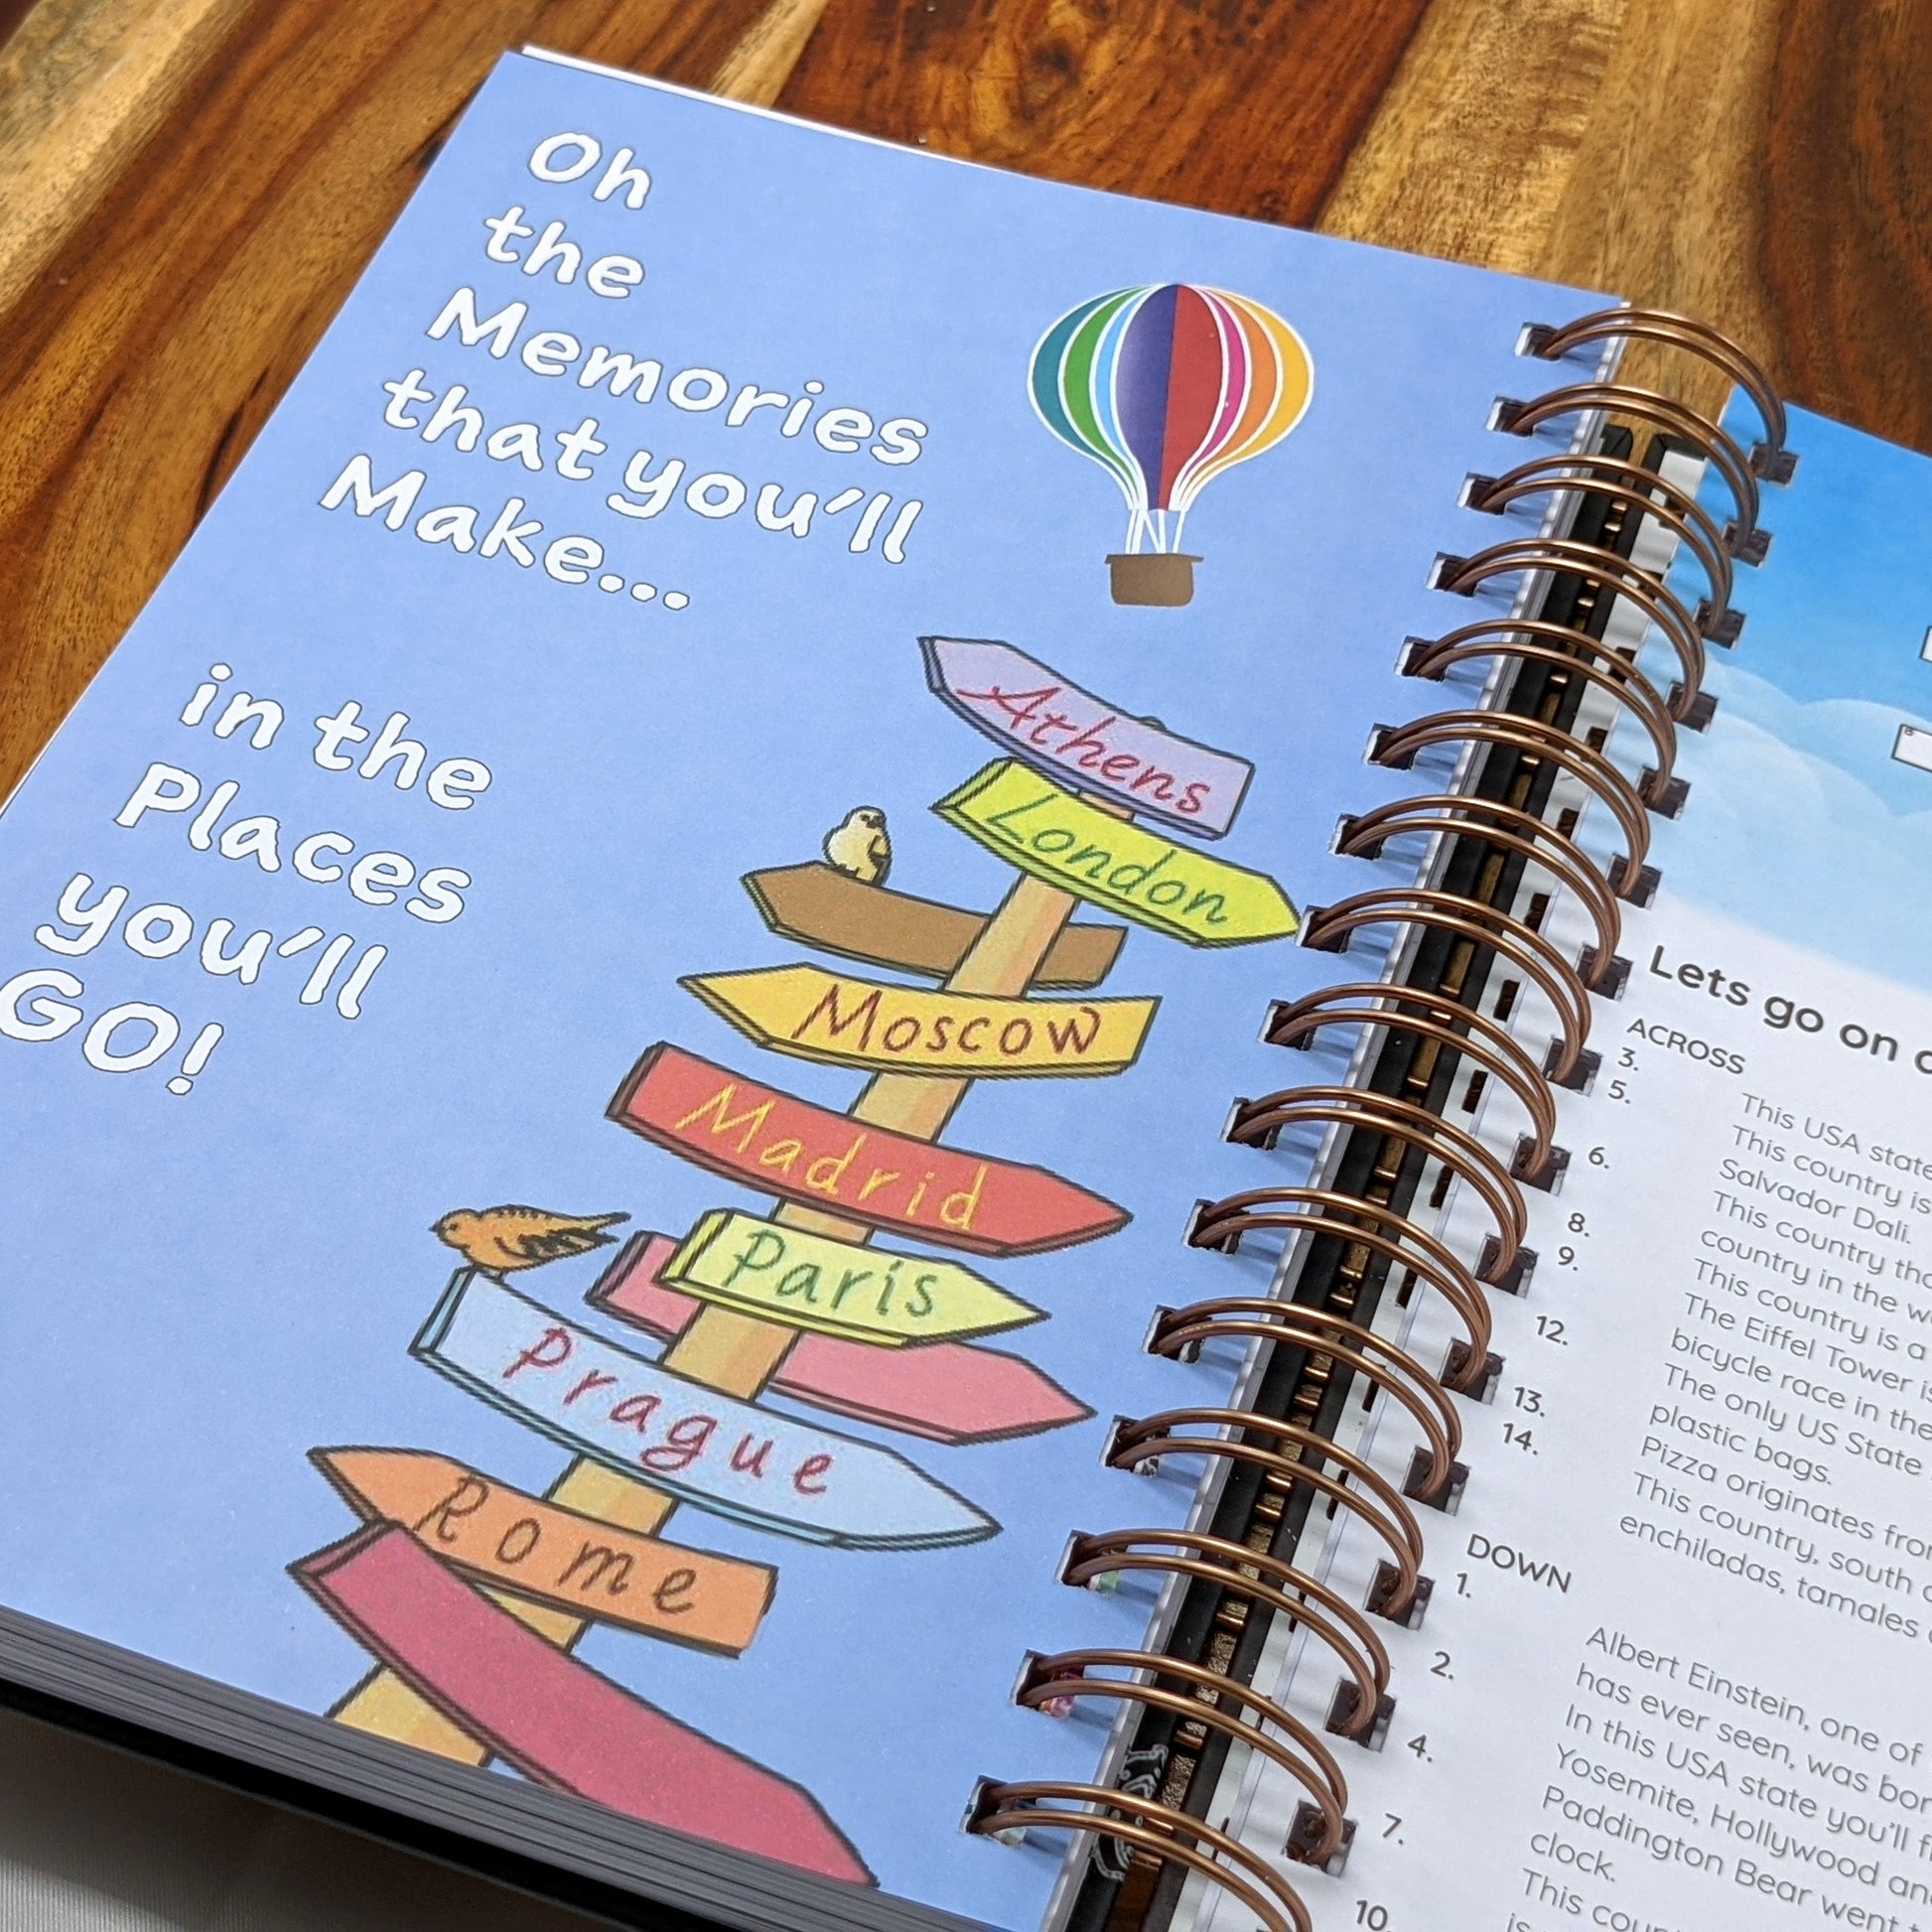 The Conversation Cards – The Diary